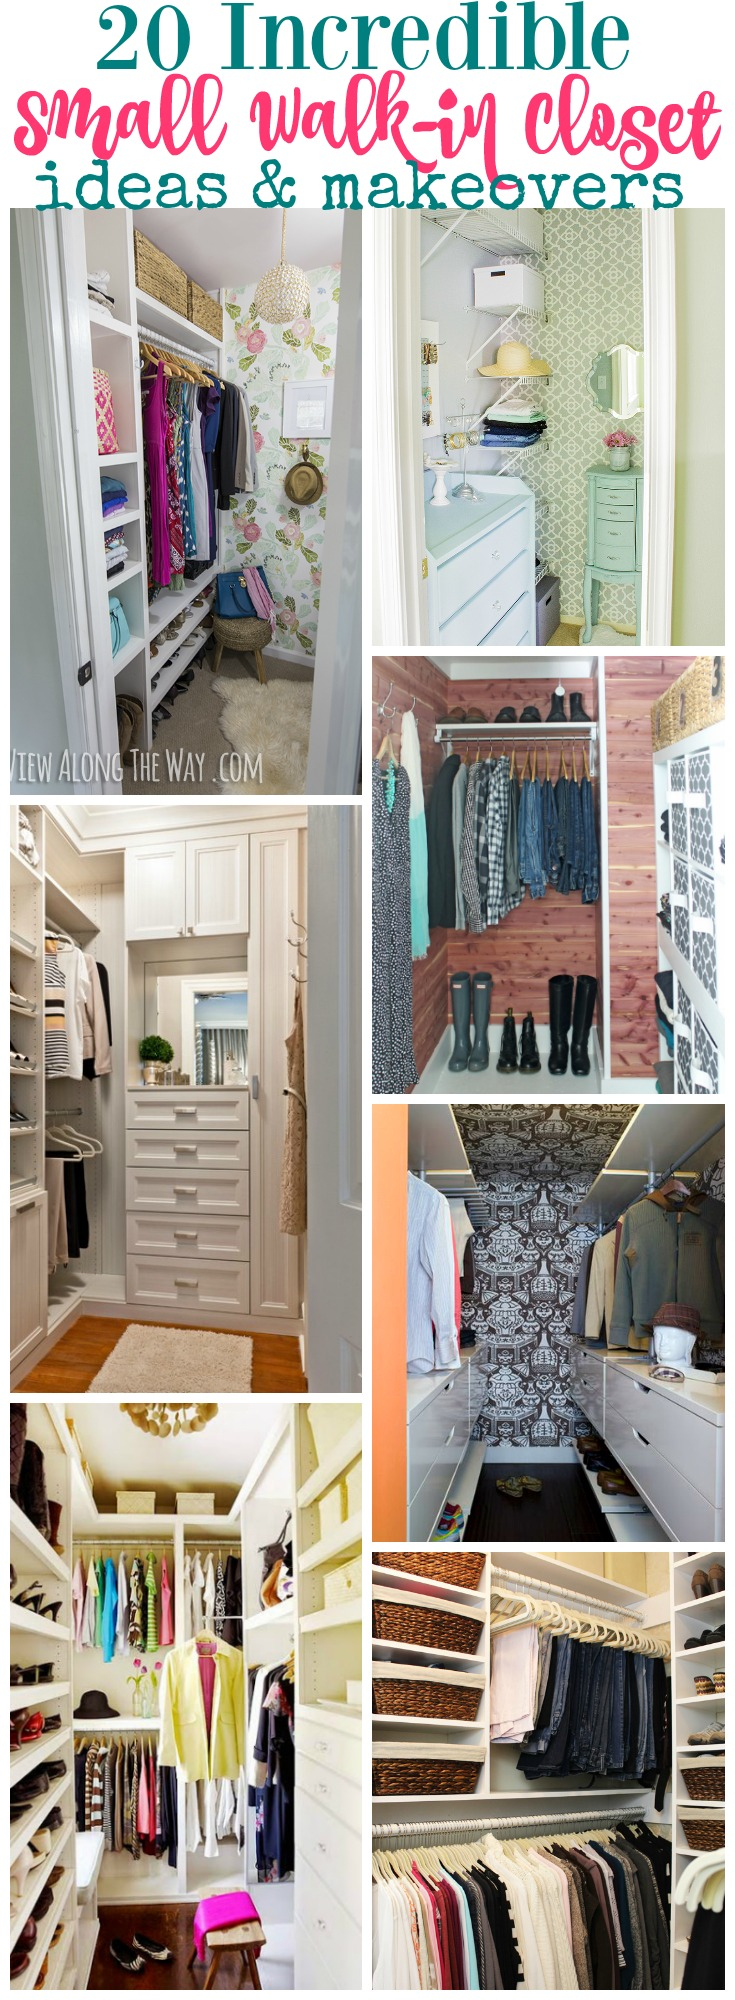 10 Fantastic Closet Organization Ideas For Small Walk In Closets 20 incredible small walk in closet ideas makeovers the happy housie 11 2024